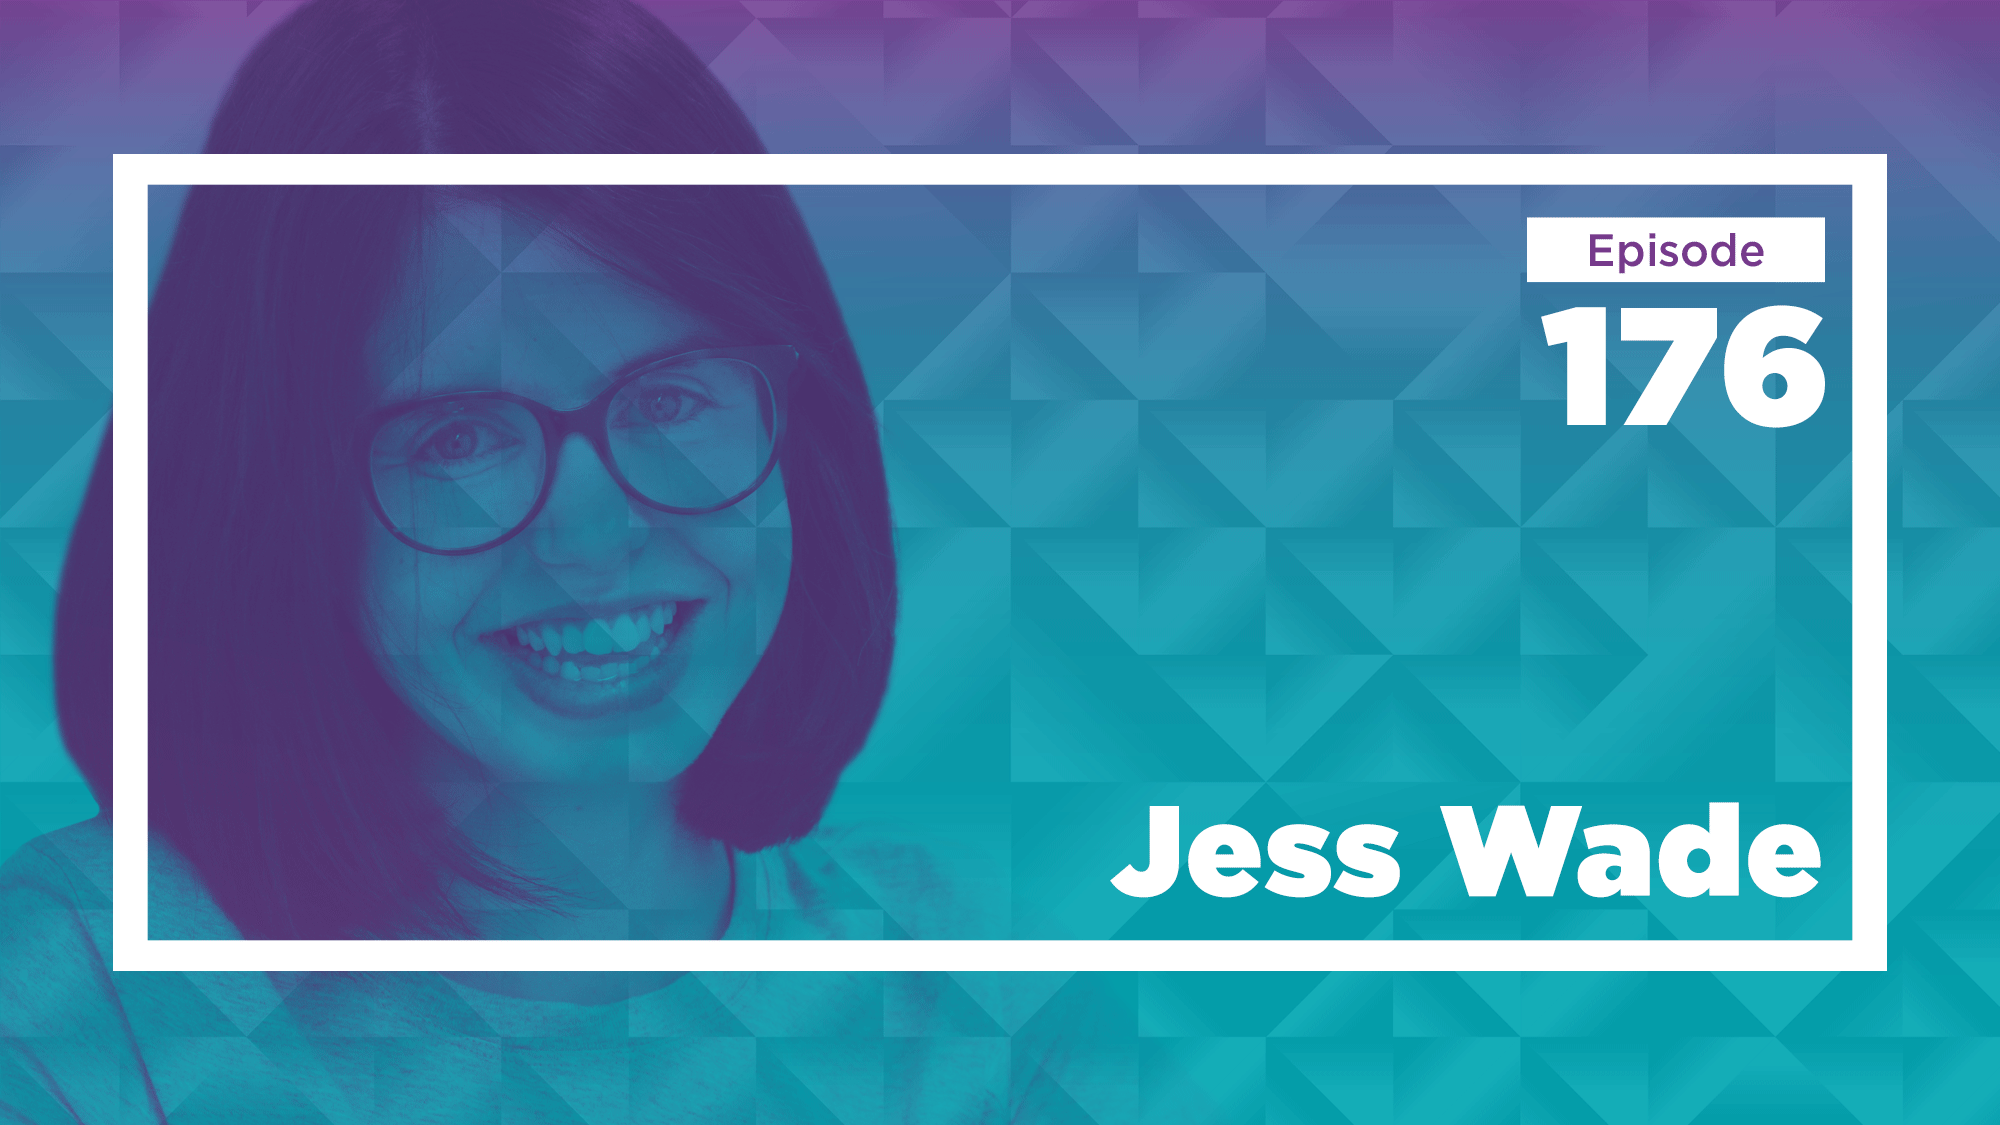 Jess Wade is creating inclusion in STEM, one Wikipedia page at a time